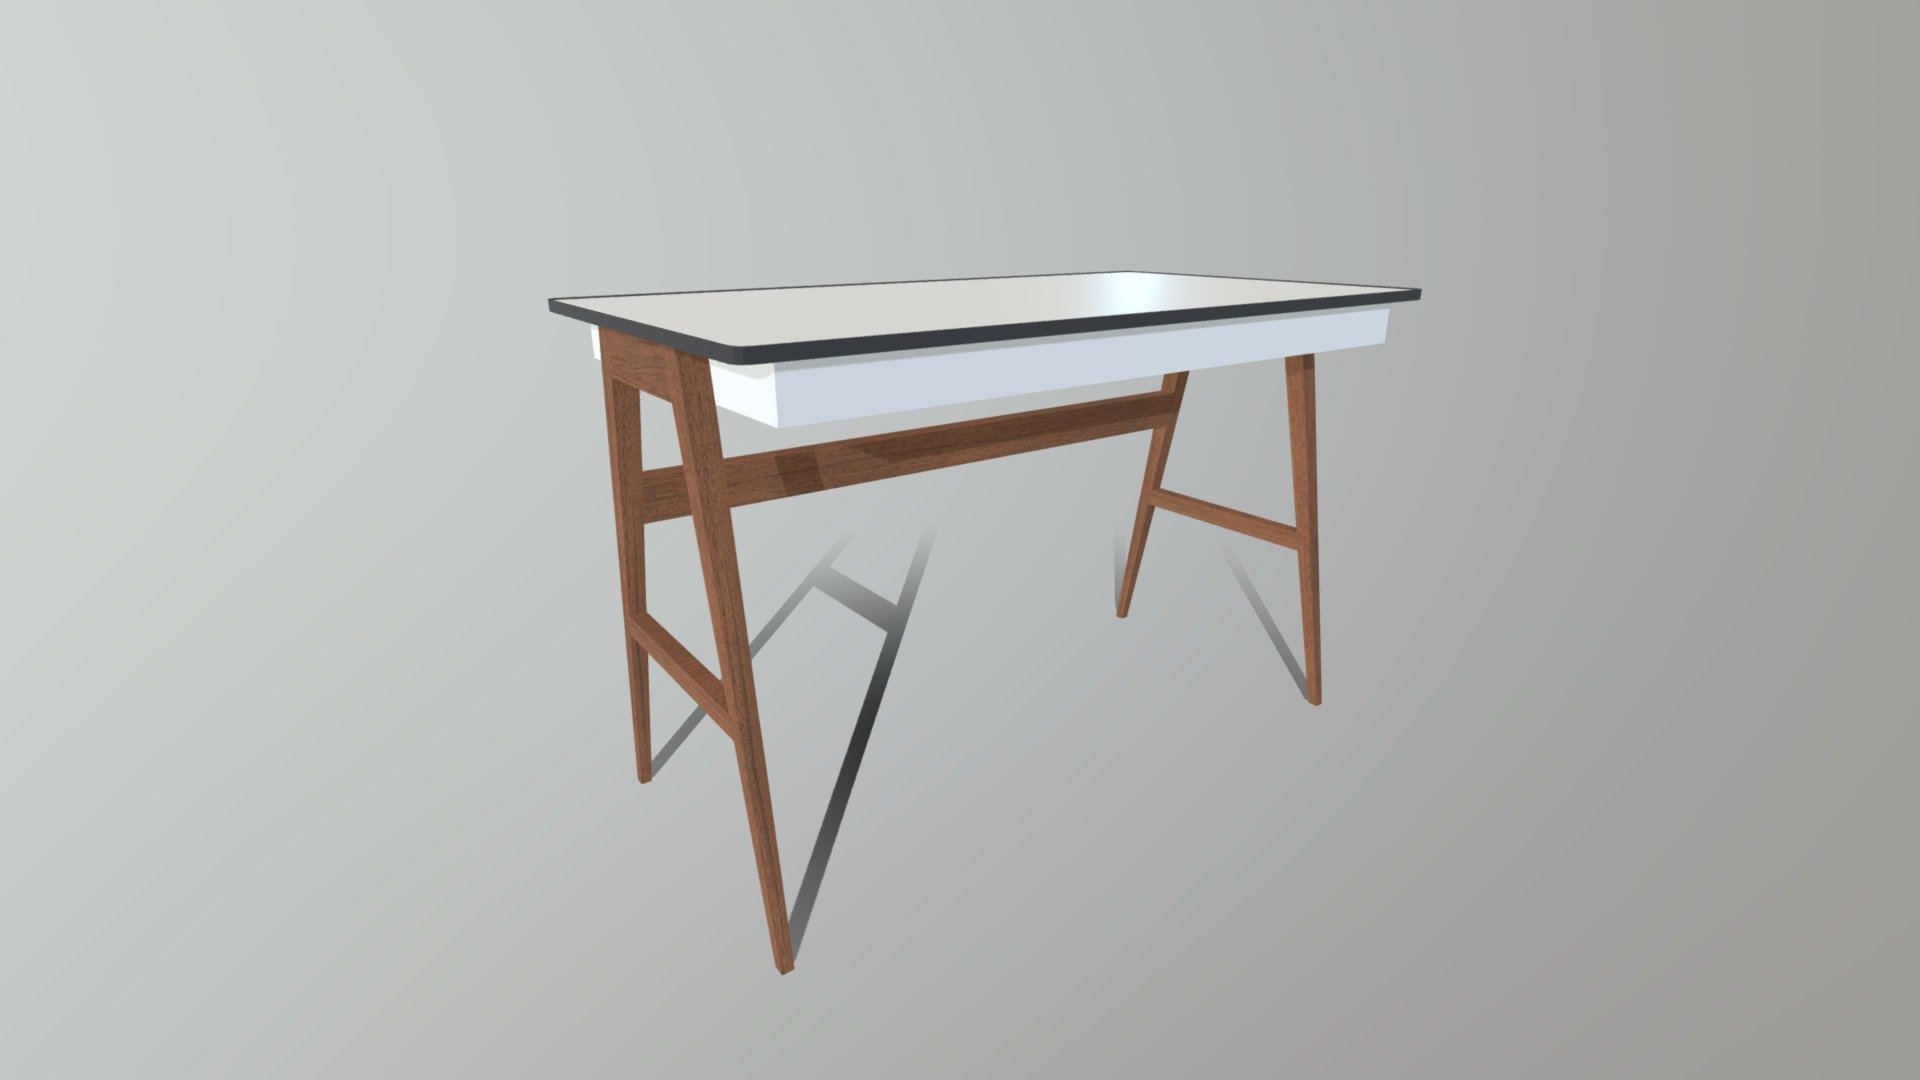 Modeled for RE4L - Real Estate for All. 08/2018

STYLE: Scandinavian

MODEL: Office Table 01

SOFTWARE: 3ds Max 2017

DESIGNER: Lucas Bender

SUPPORT: Ruan Sampaio

All rights reserved to Visual Media Content - visualmediacontent.com - Office Table S1M1 - Buy Royalty Free 3D model by Visual Media Content (@vmc) 3d model